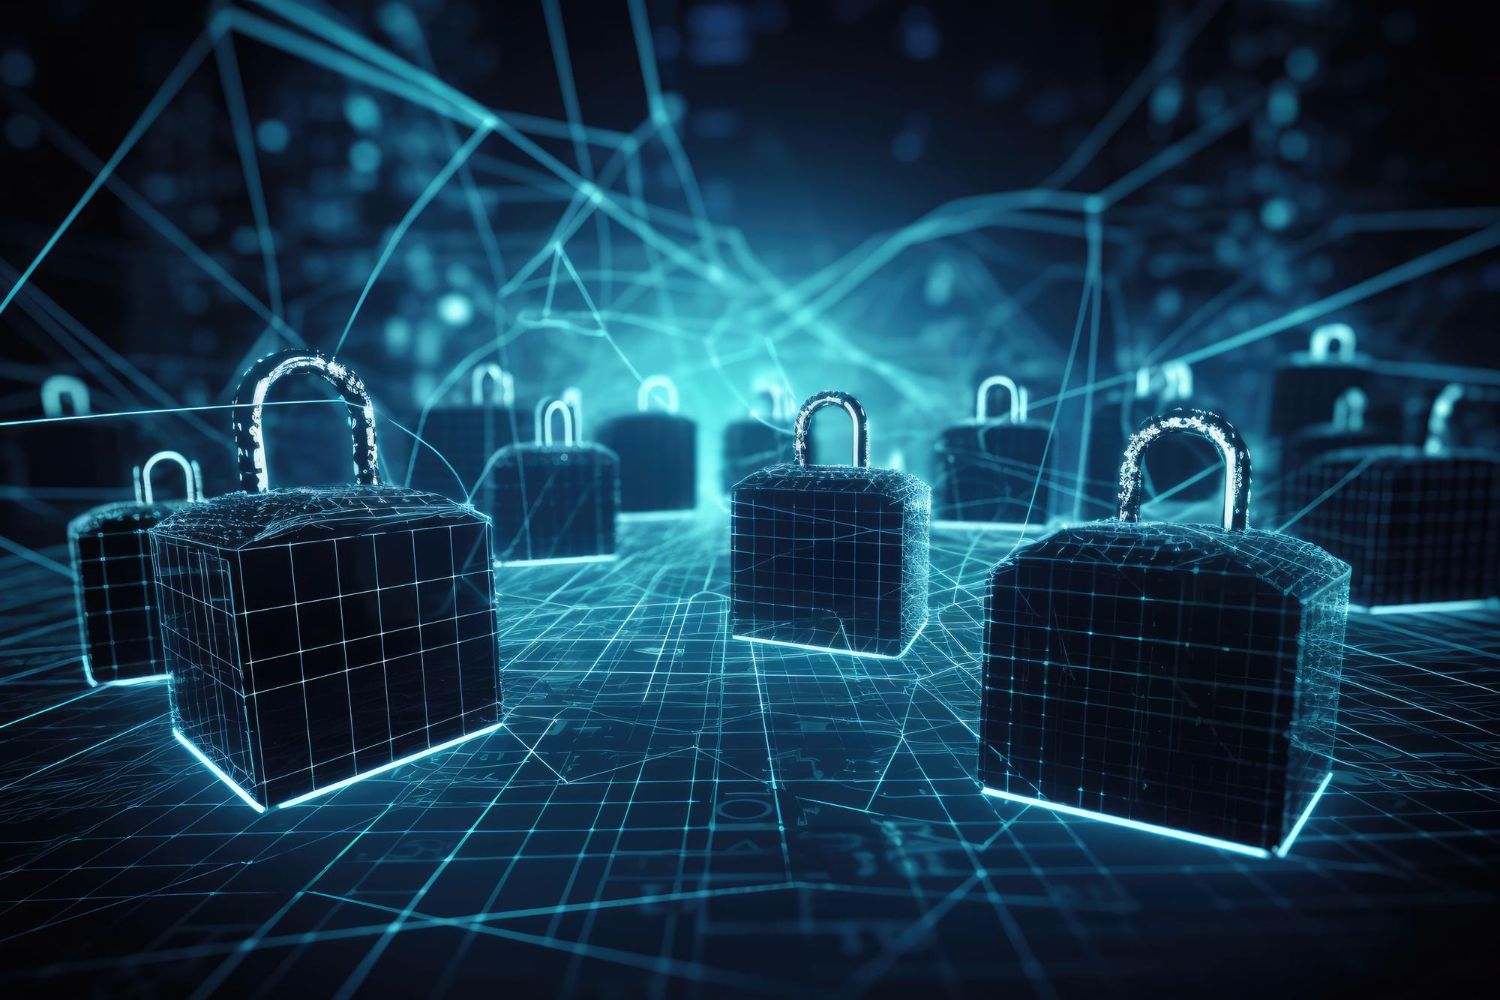 Graphic - Blockchain nodes shown as padlocks, all on a futuristic background.